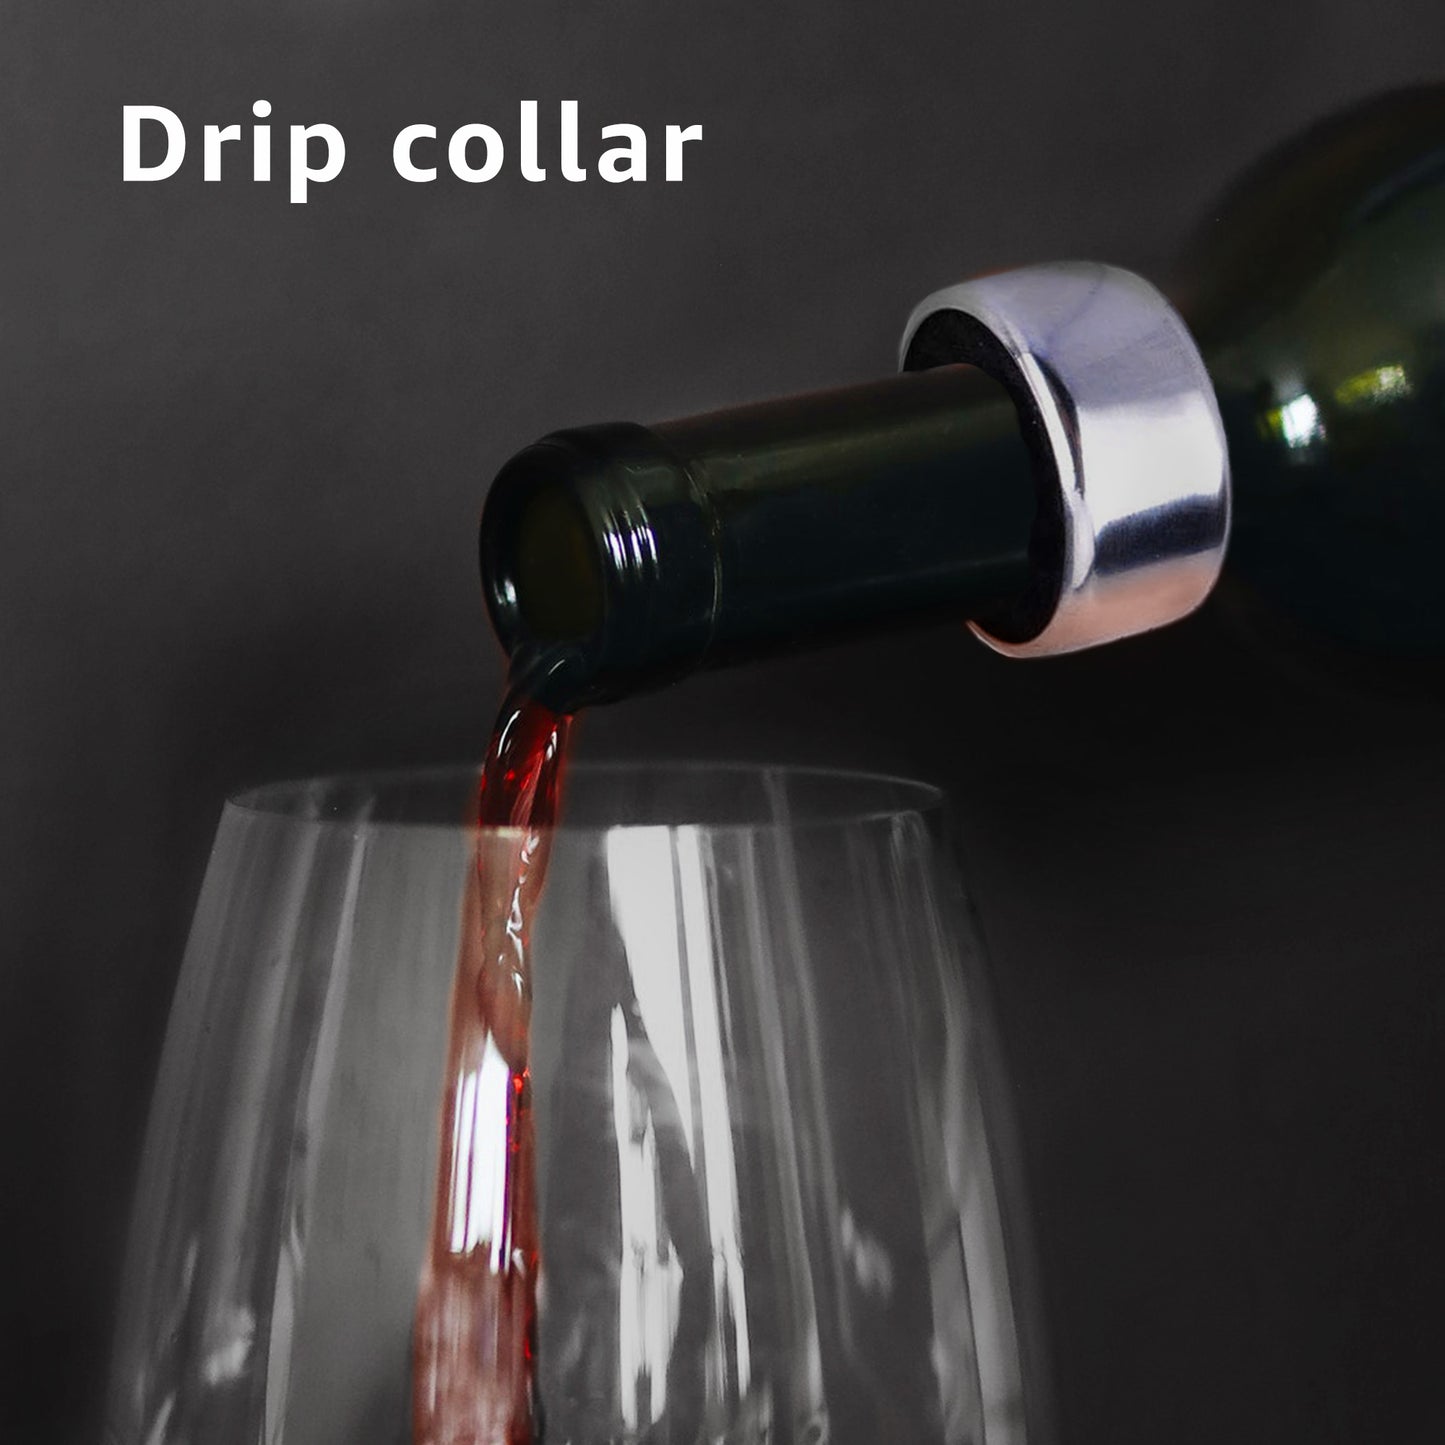 WINE SET - Accessories Designed to Optimize Your Wine-Drinking Experience